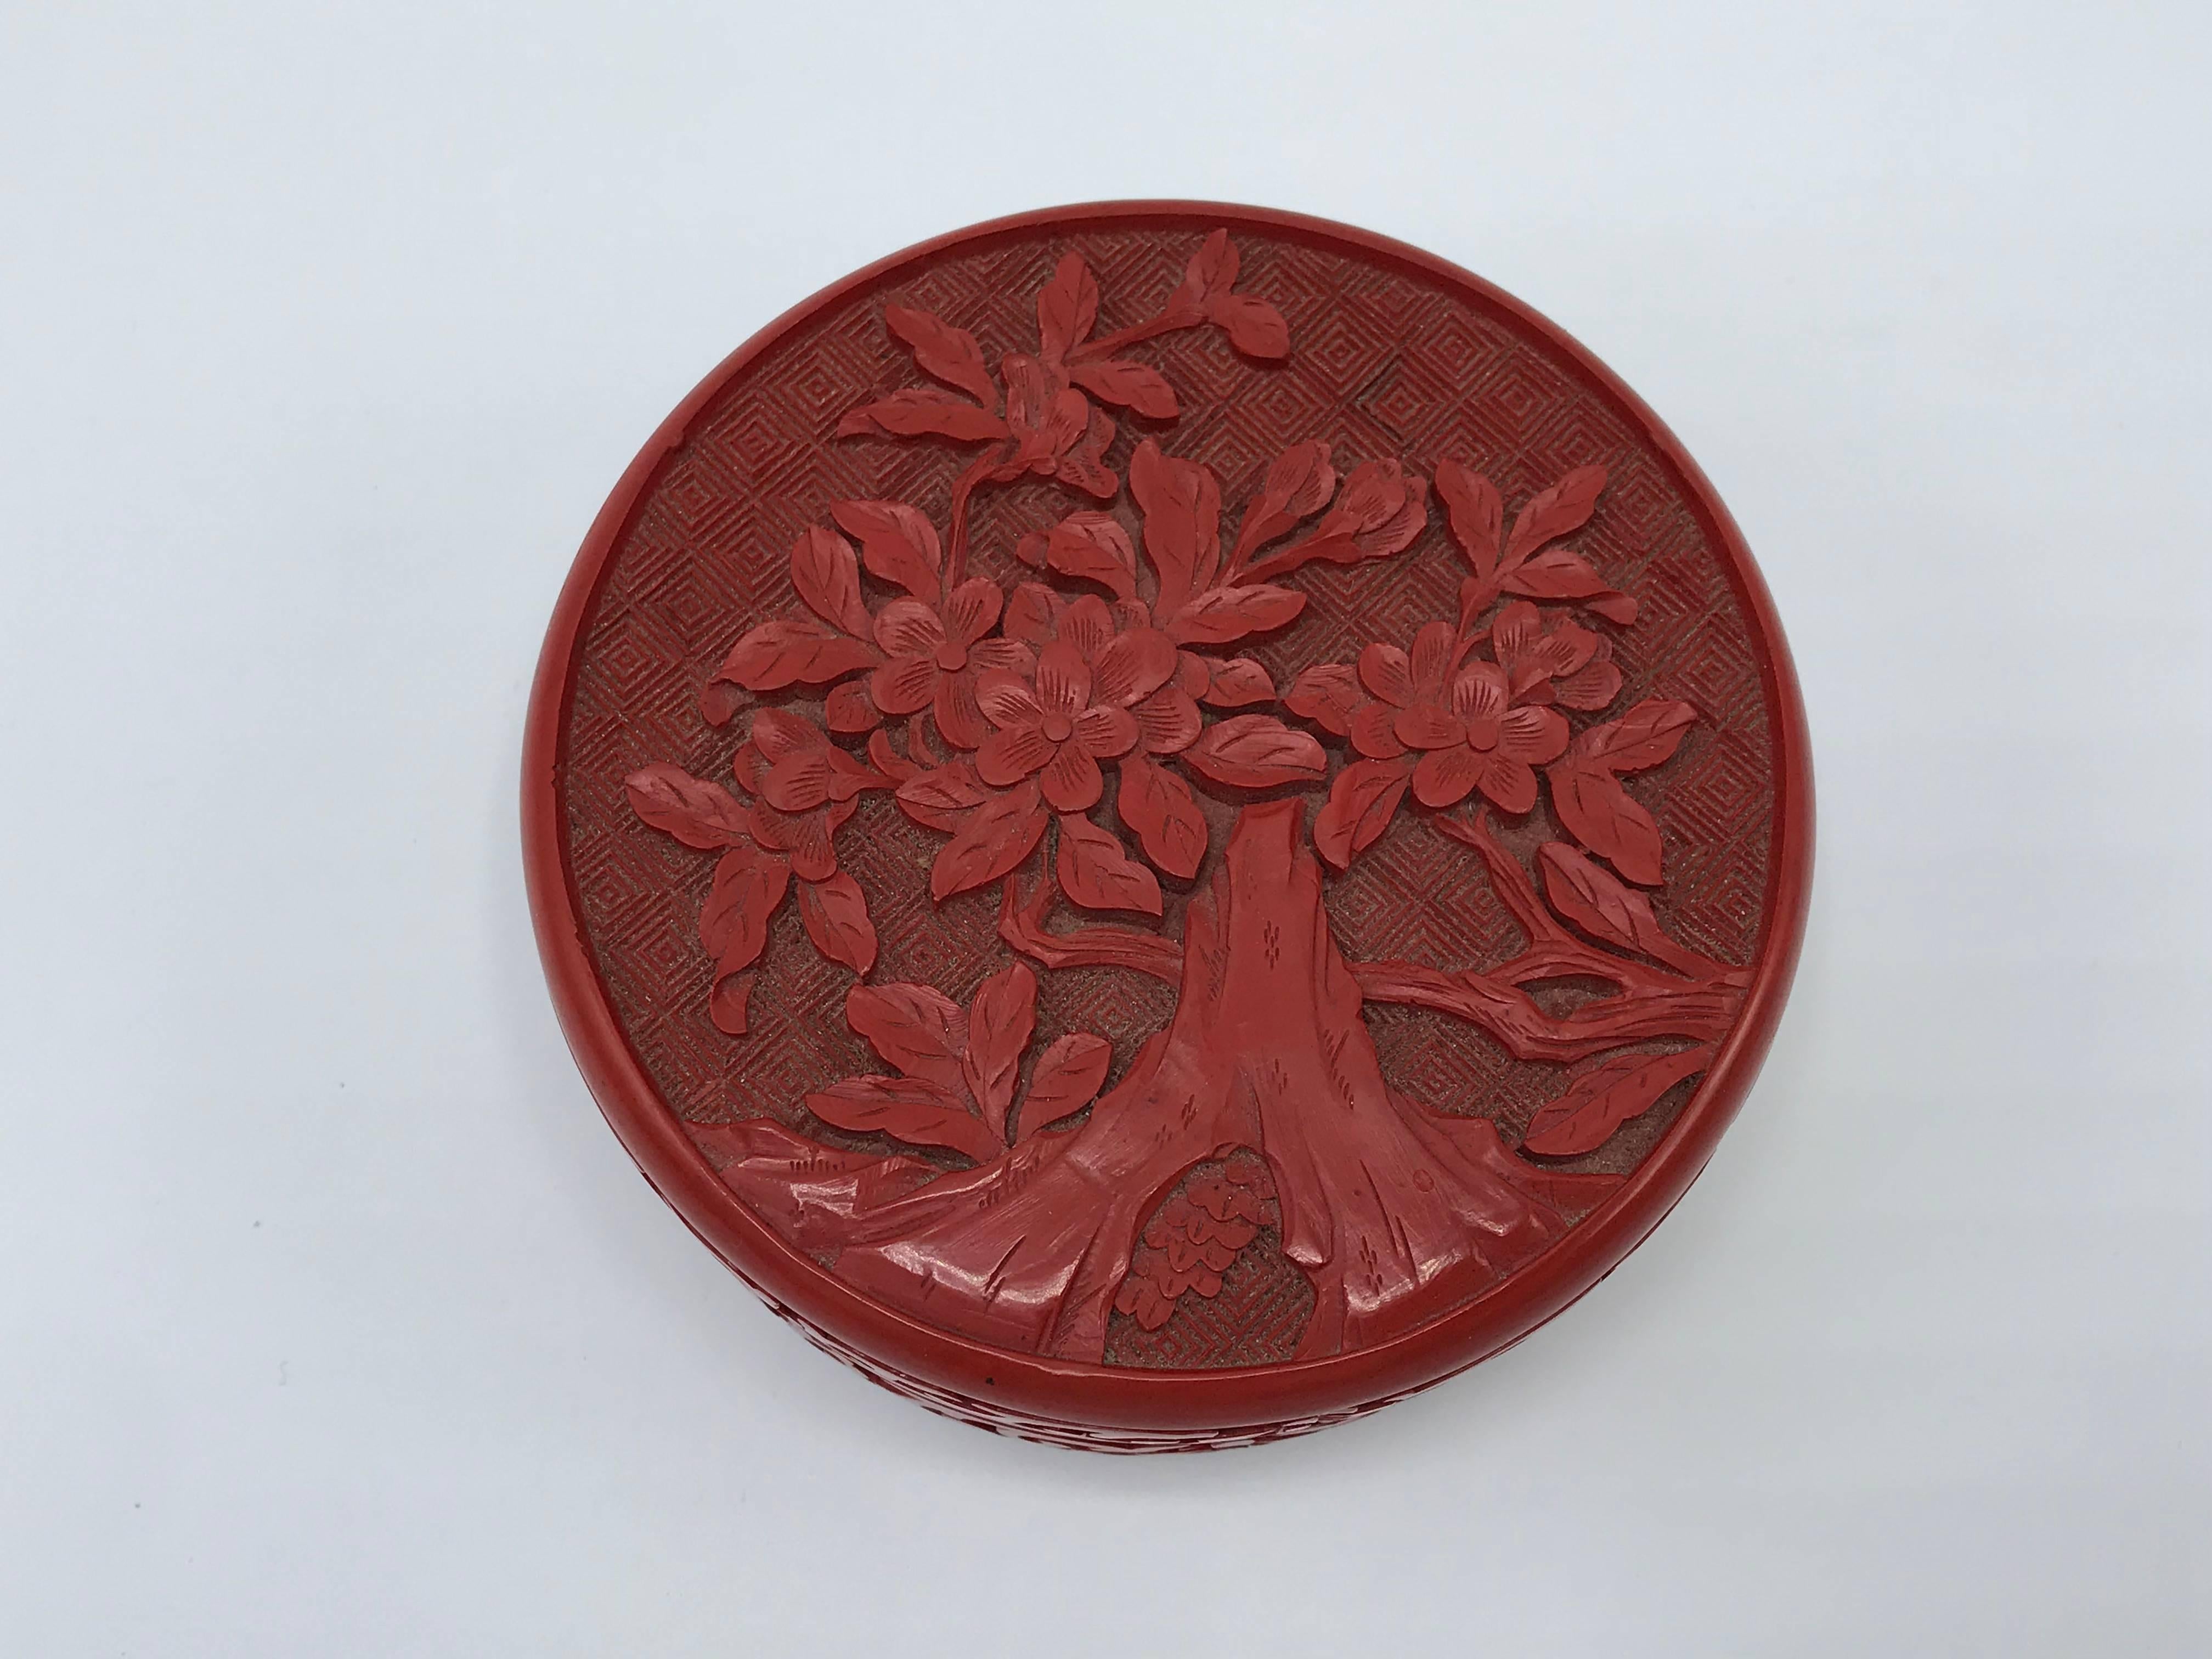 Offered is an exquisite, 1960s cinnabar and cloisonné lidded box. The piece has a heavily details floral and tree motif on the lid with ornate fretwork around the sides.